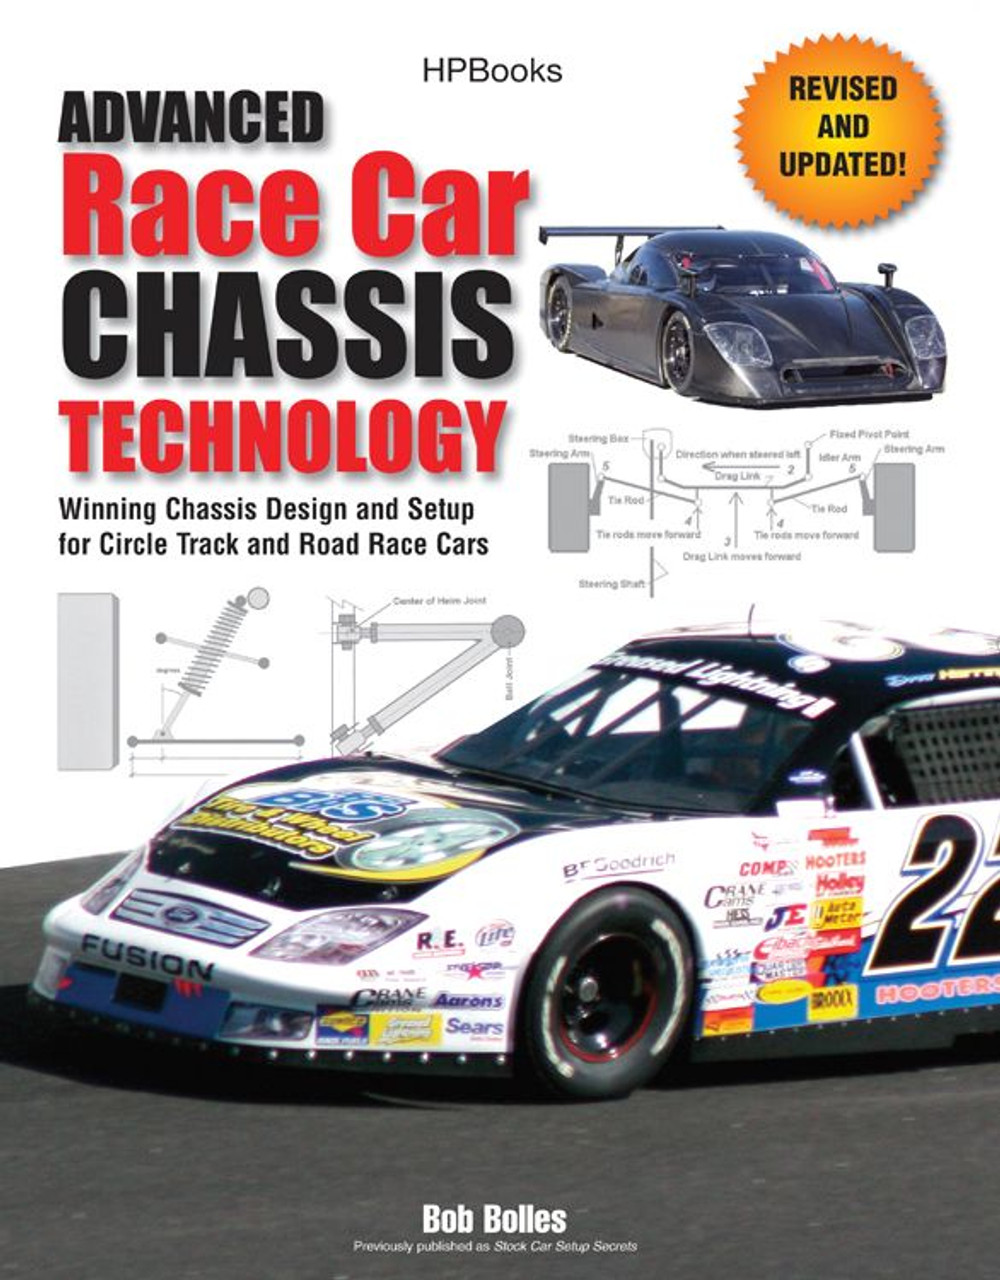 HP Books Adv Race Car Chassis Technology Book - HPPHP1562